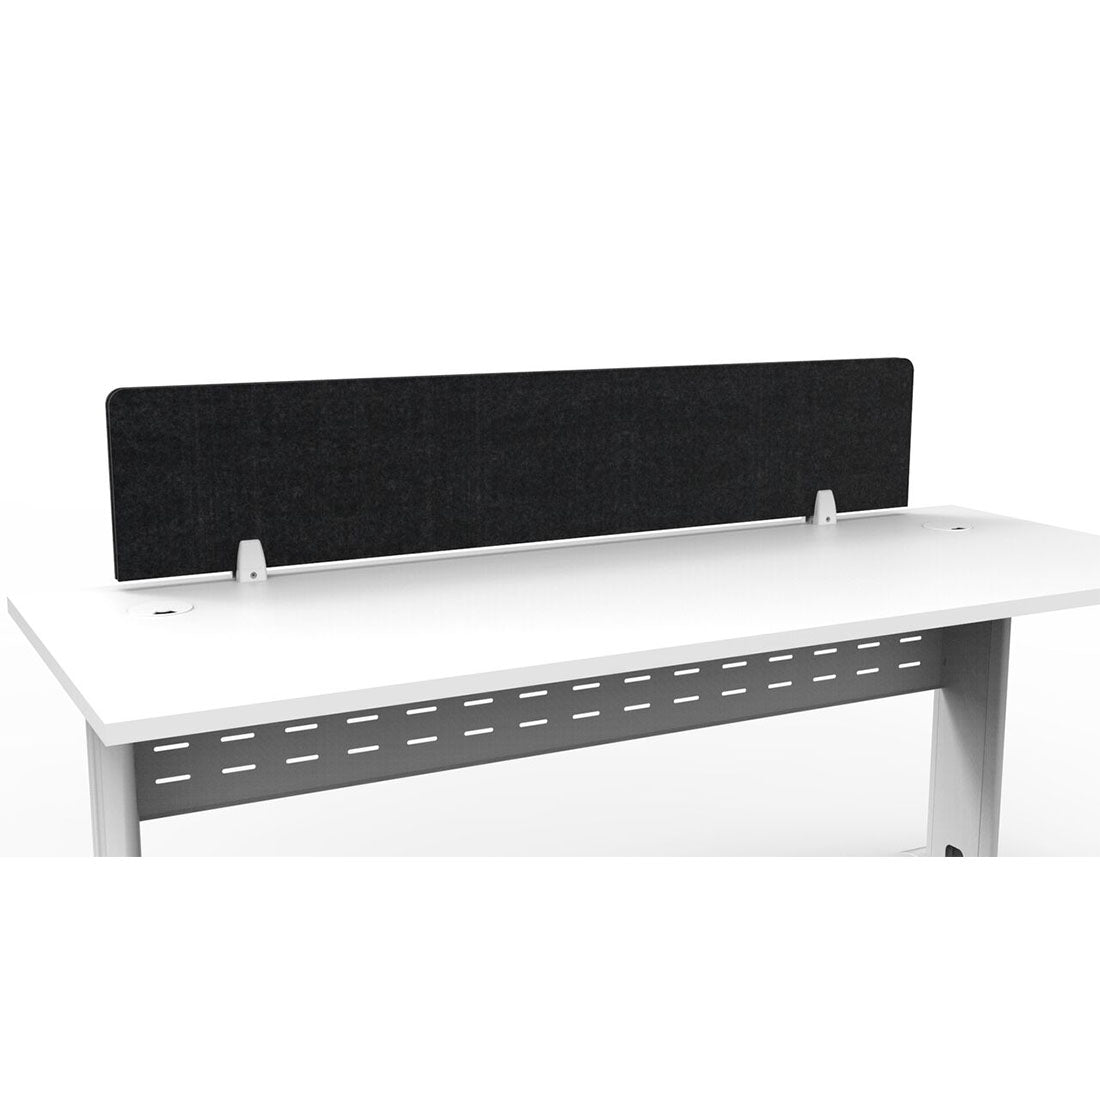 Eco Desk Mounted Privacy Screens - switchoffice.com.au